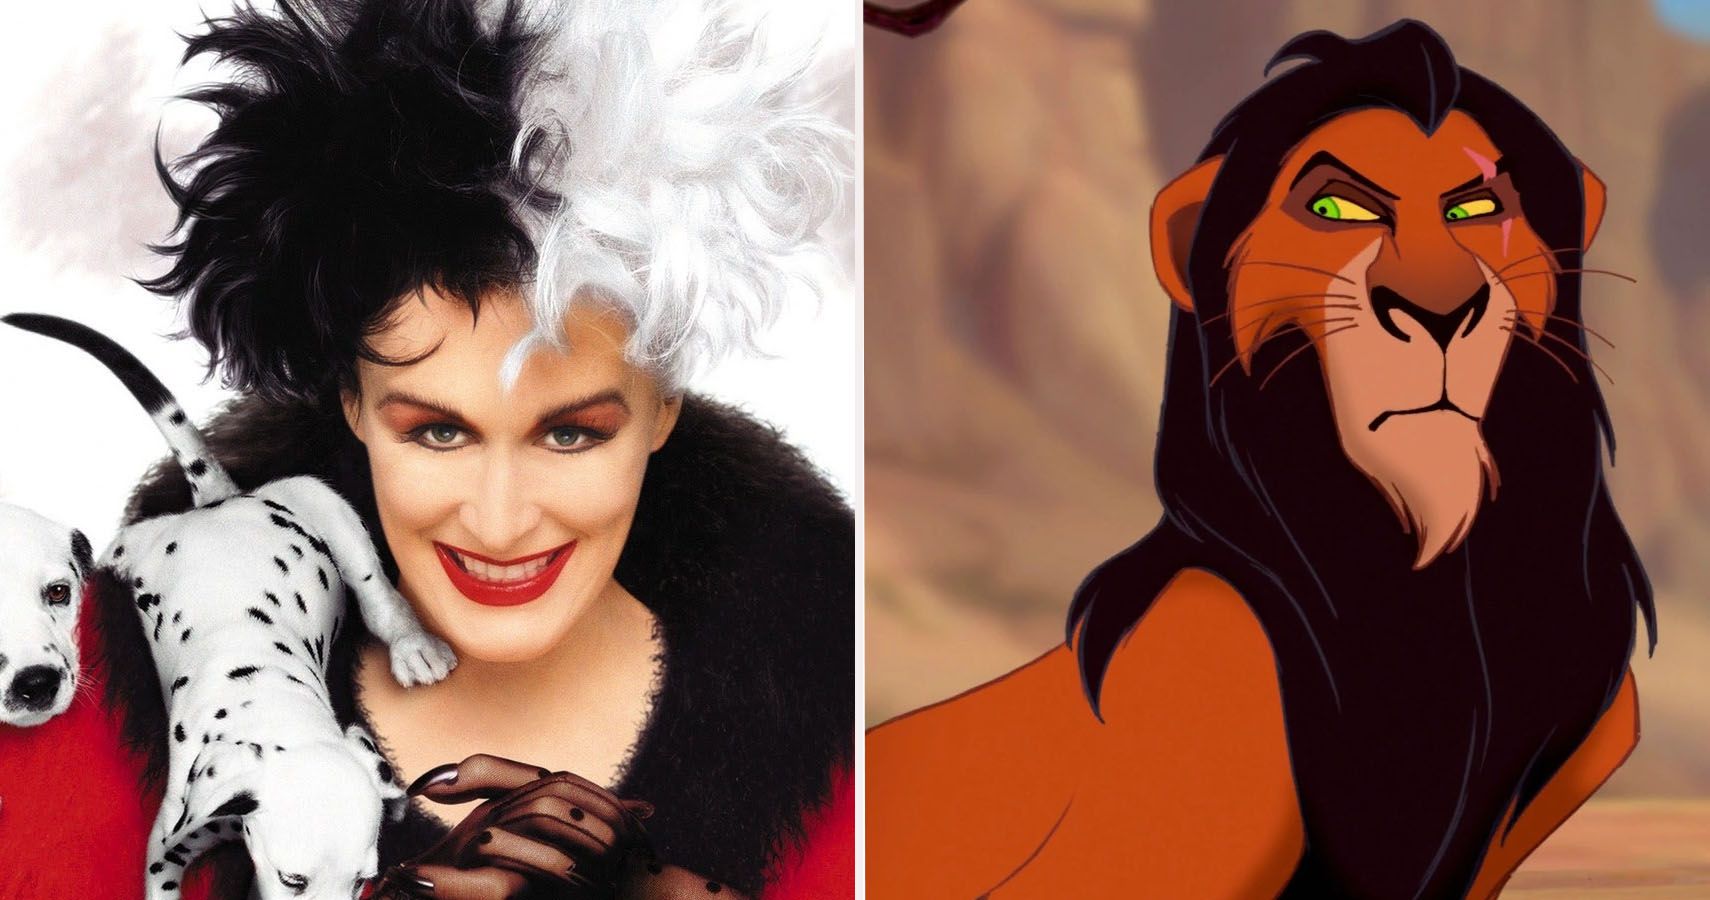 10 Of The Cruelest Lines From Disney Villains Ranked